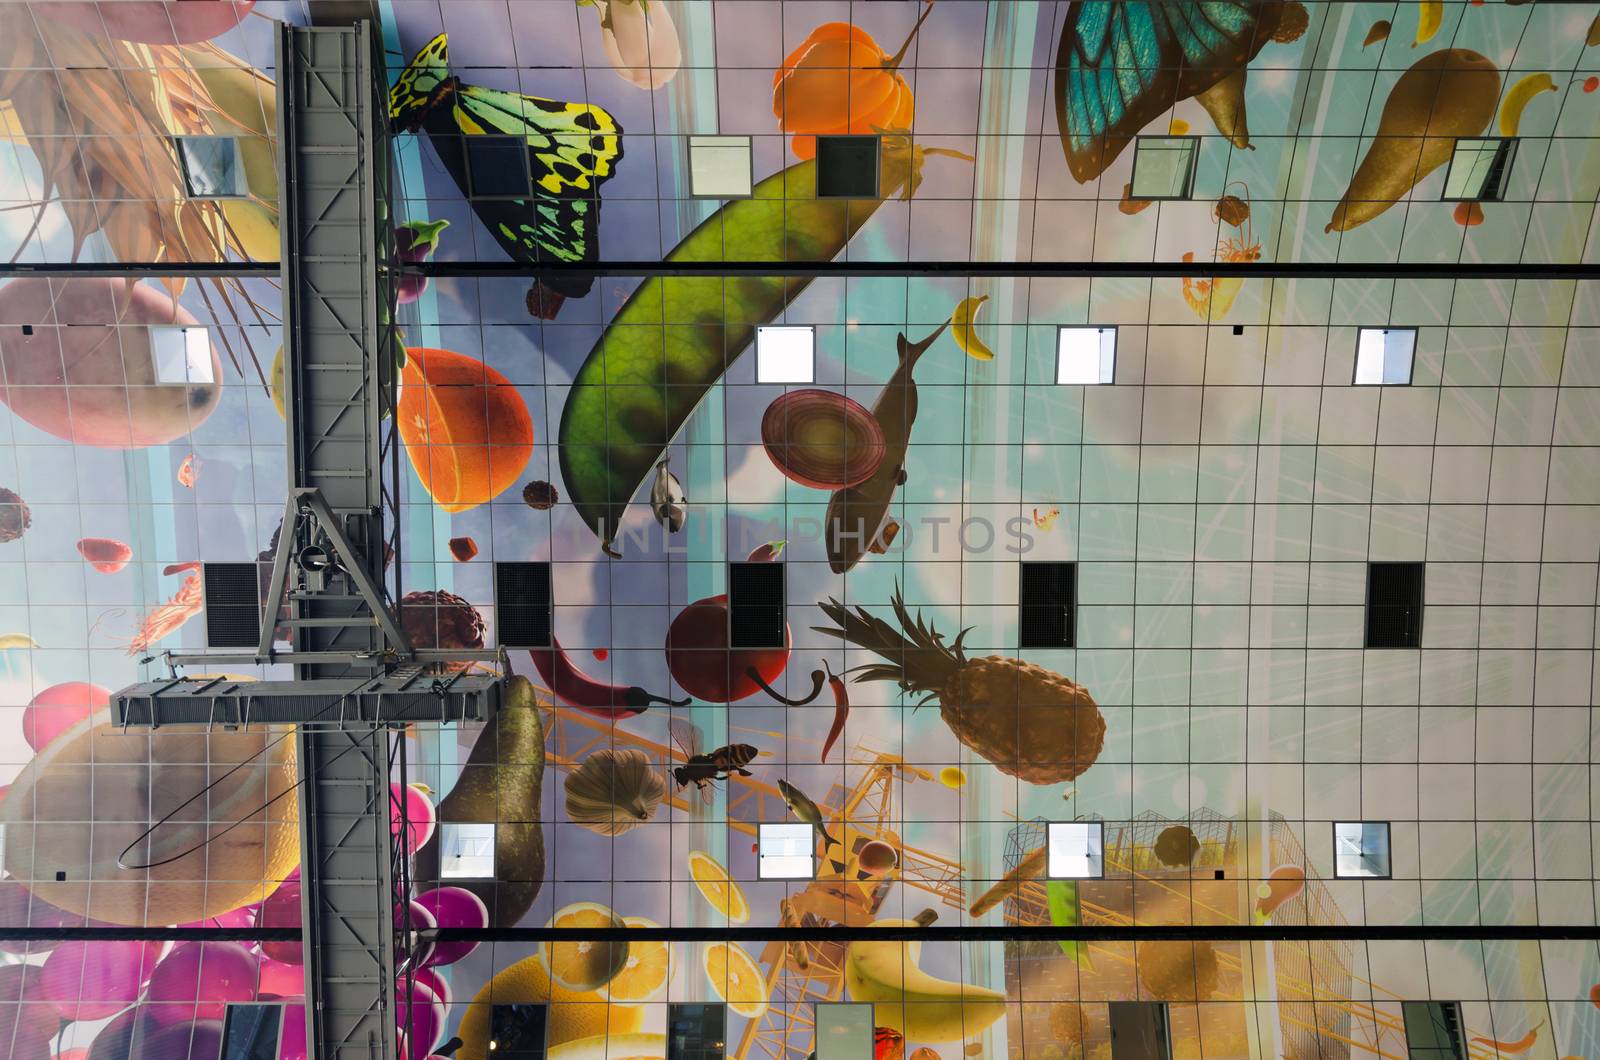 Ceiling of the new artistic Markthal in Rotterdam by siraanamwong